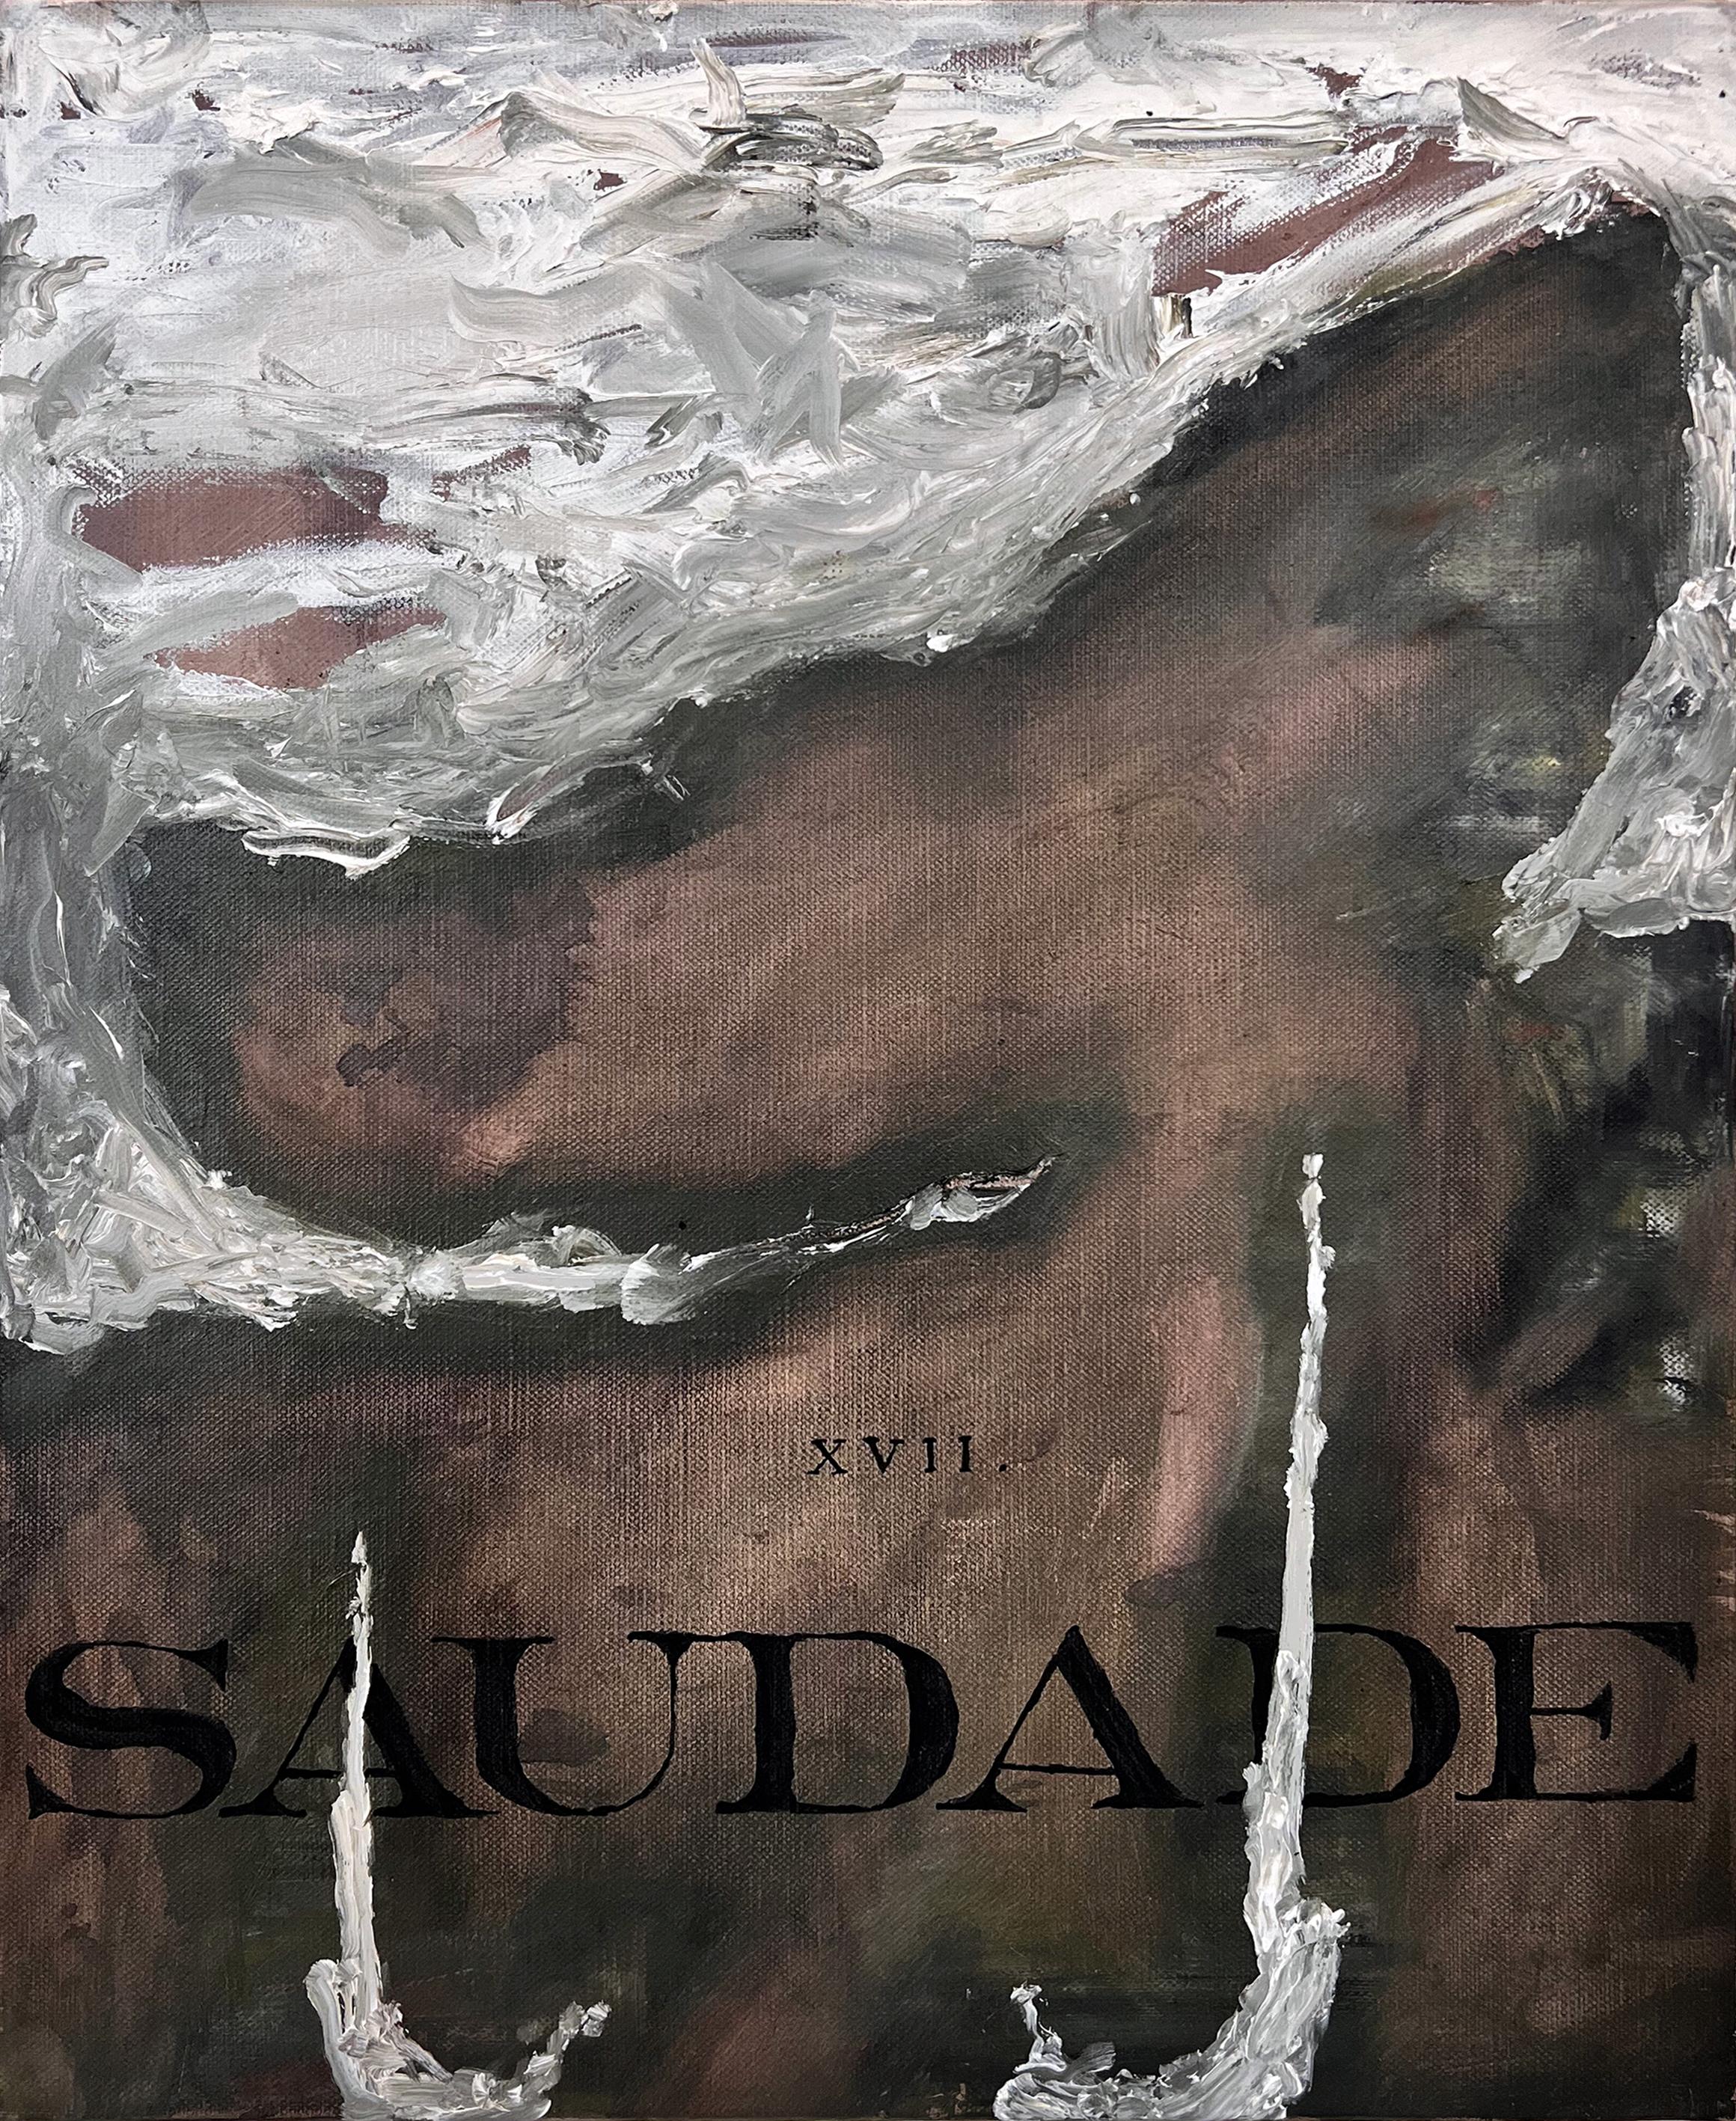 Nicholas Evans Abstract Painting - "Saudade" (black & white, rich, text, type, abstract, surreal, natural, neutral)